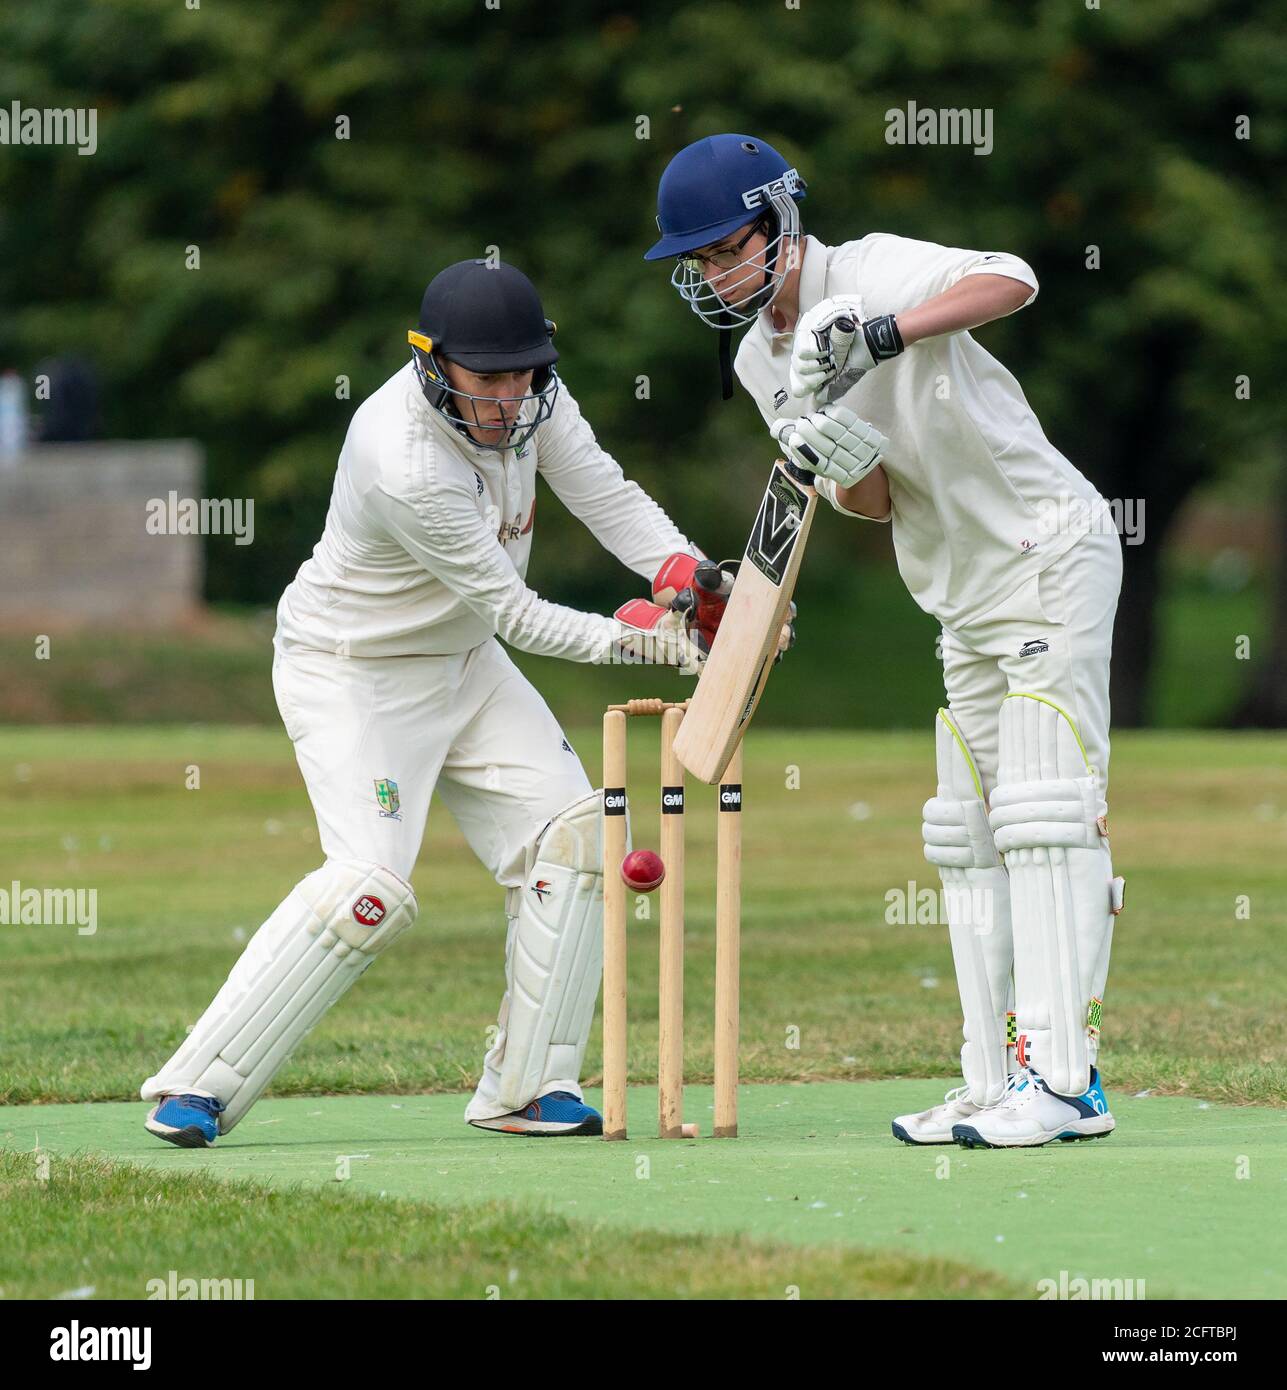 6 September 2020. Cooper Park, Elgin, Moray, Scotland, UK. This is members of RAF Lossiemouth and Elgin Cricket Clubs playing a match within the Coope Stock Photo